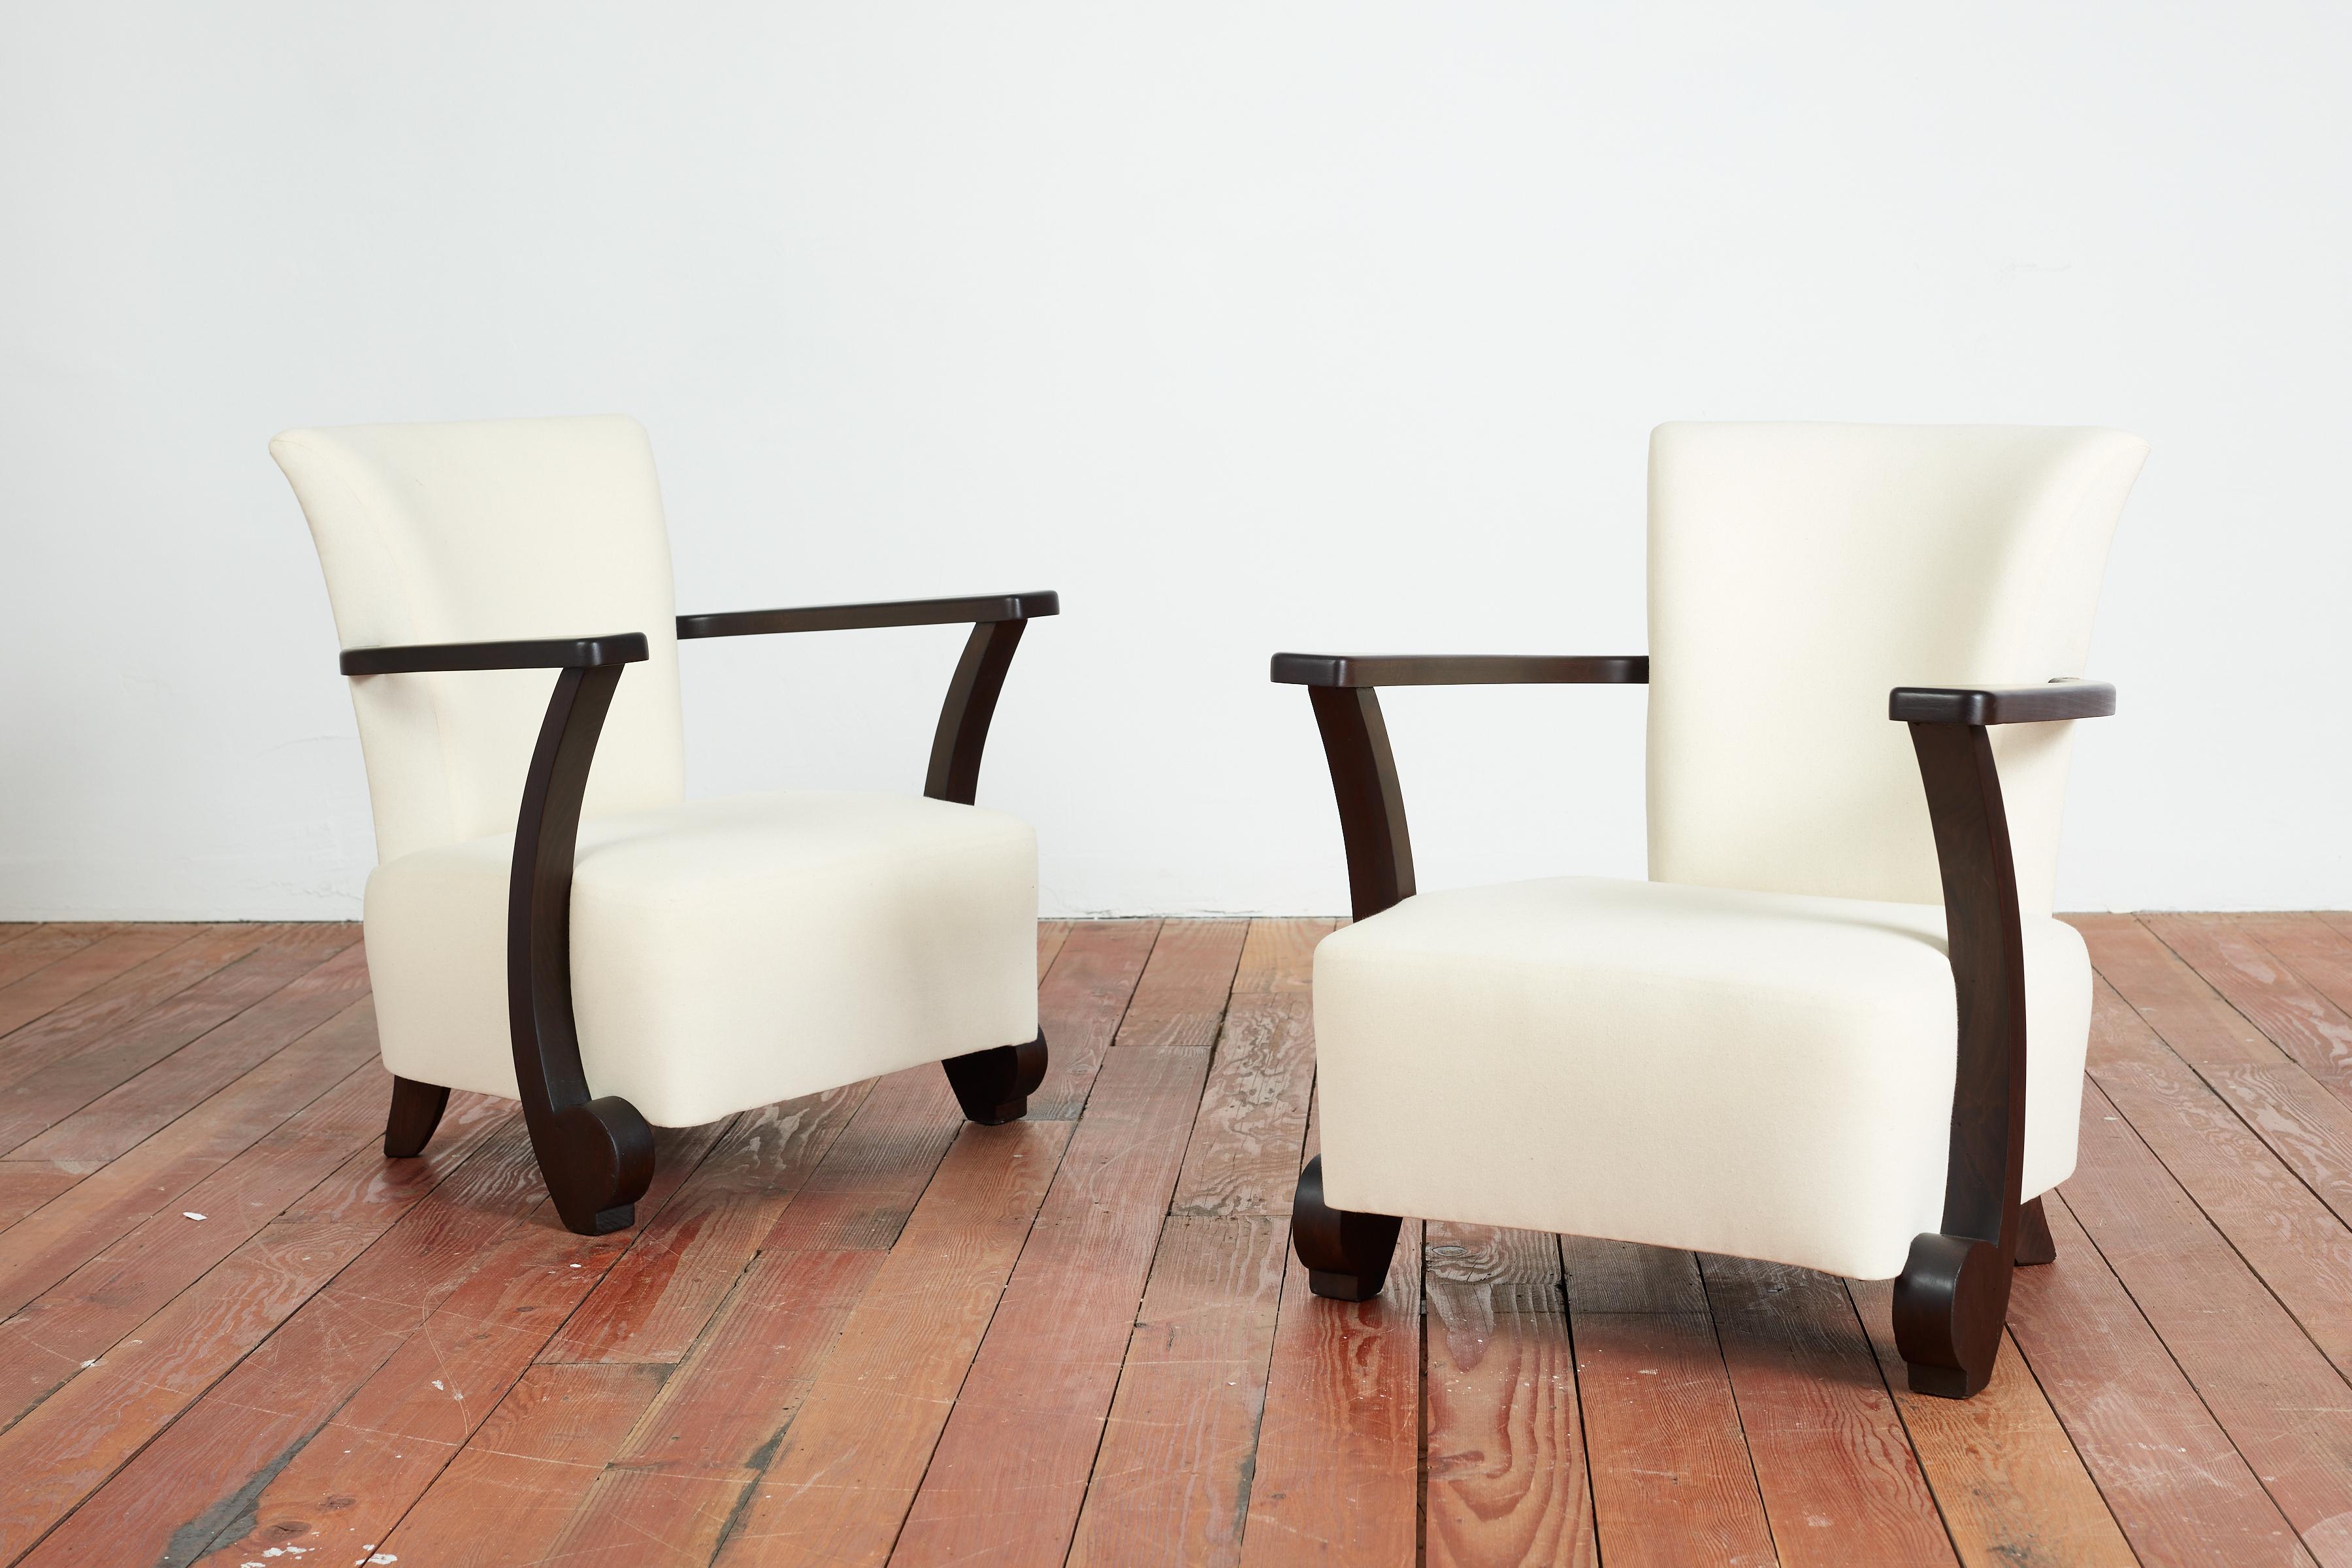 Pair of French Art Deco Chairs with ebony wood frame and upholstered in white muslin fabric - 
Petite in scale with interesting curves and shape 
France, 1940s